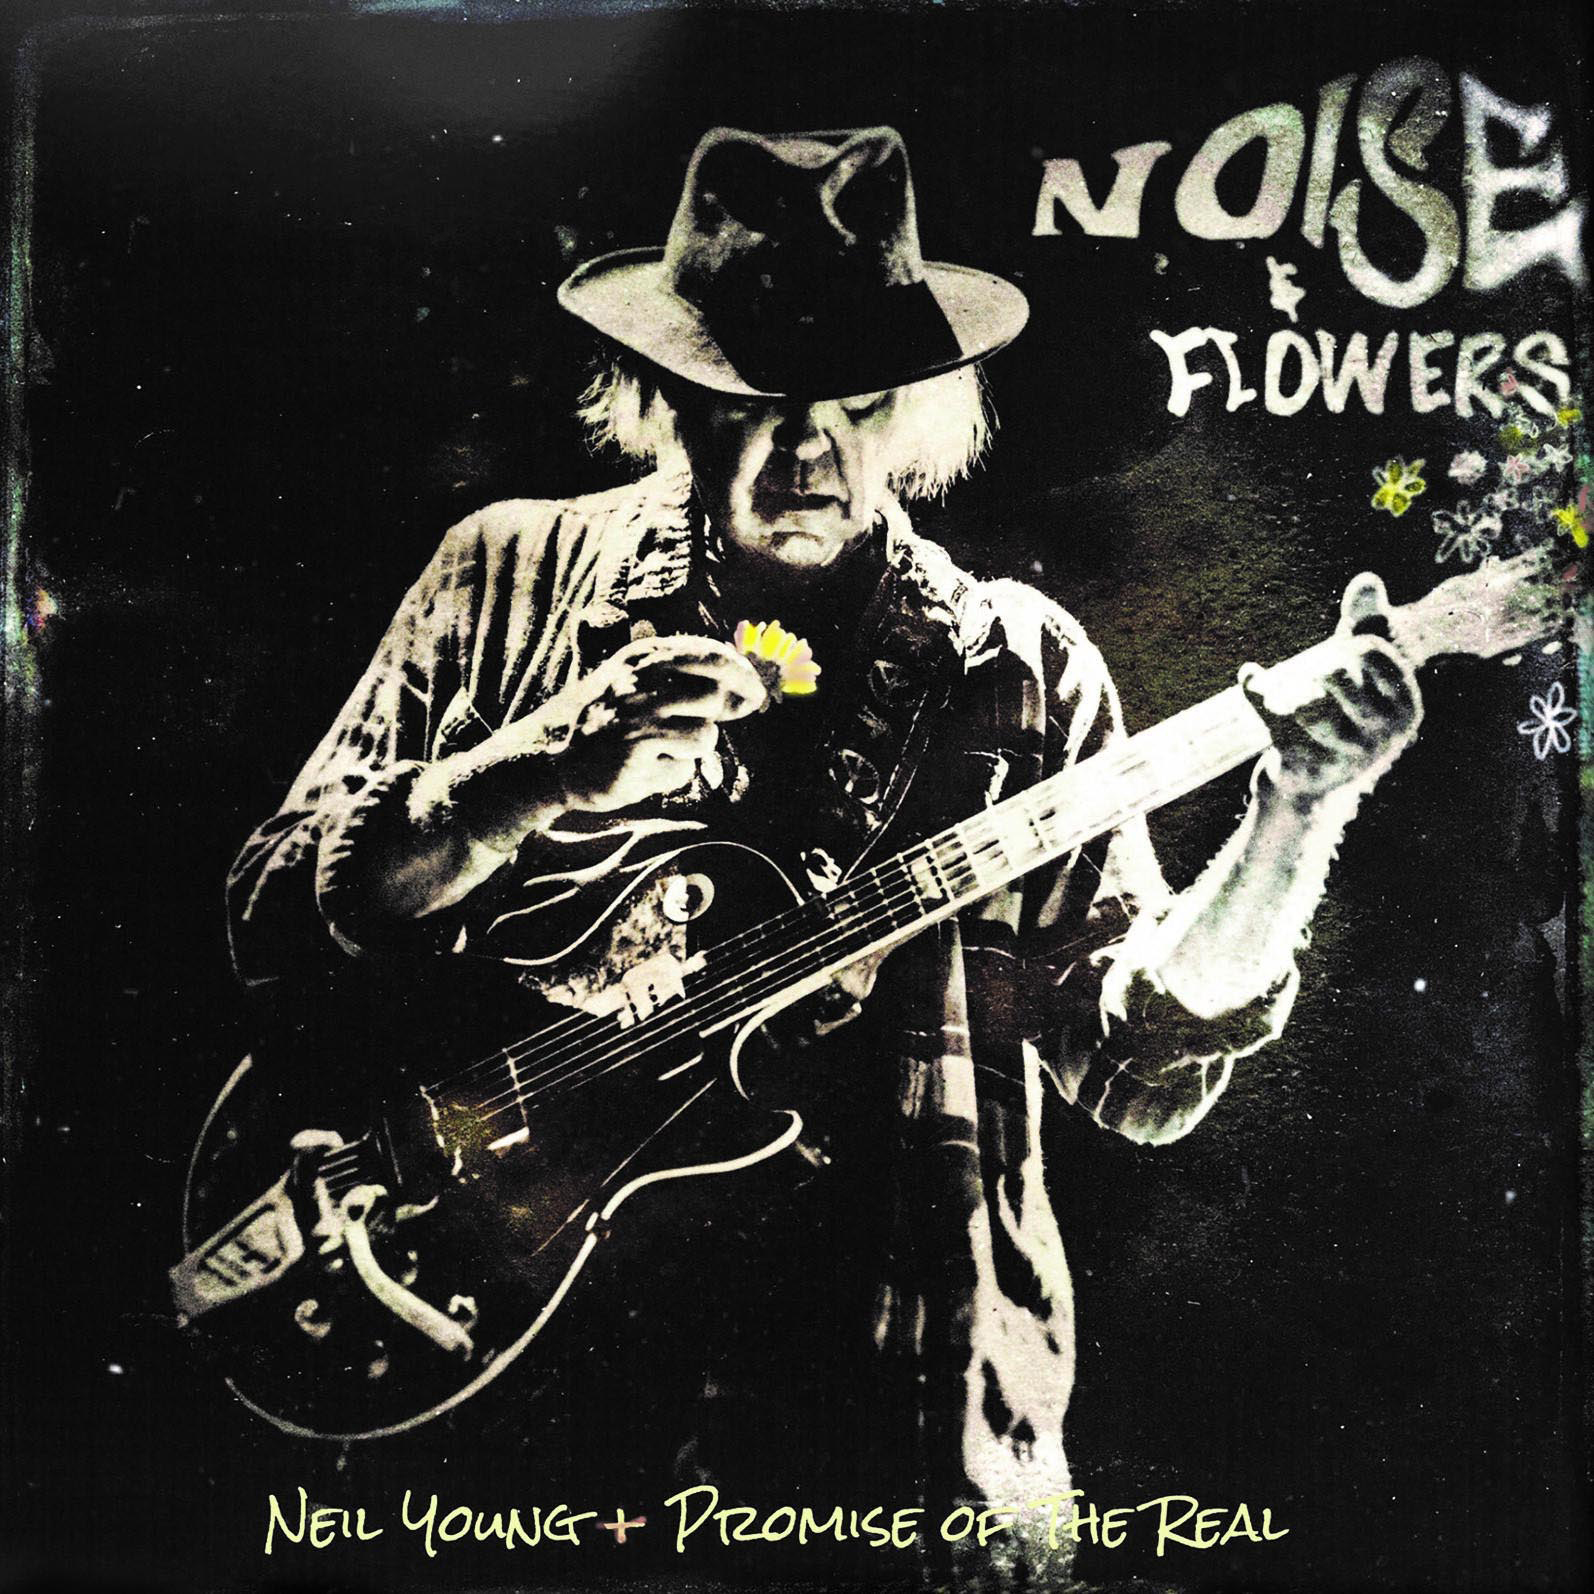 - set) The Real Young Promise (Box FLOWERS NOISE And + - Neil Of